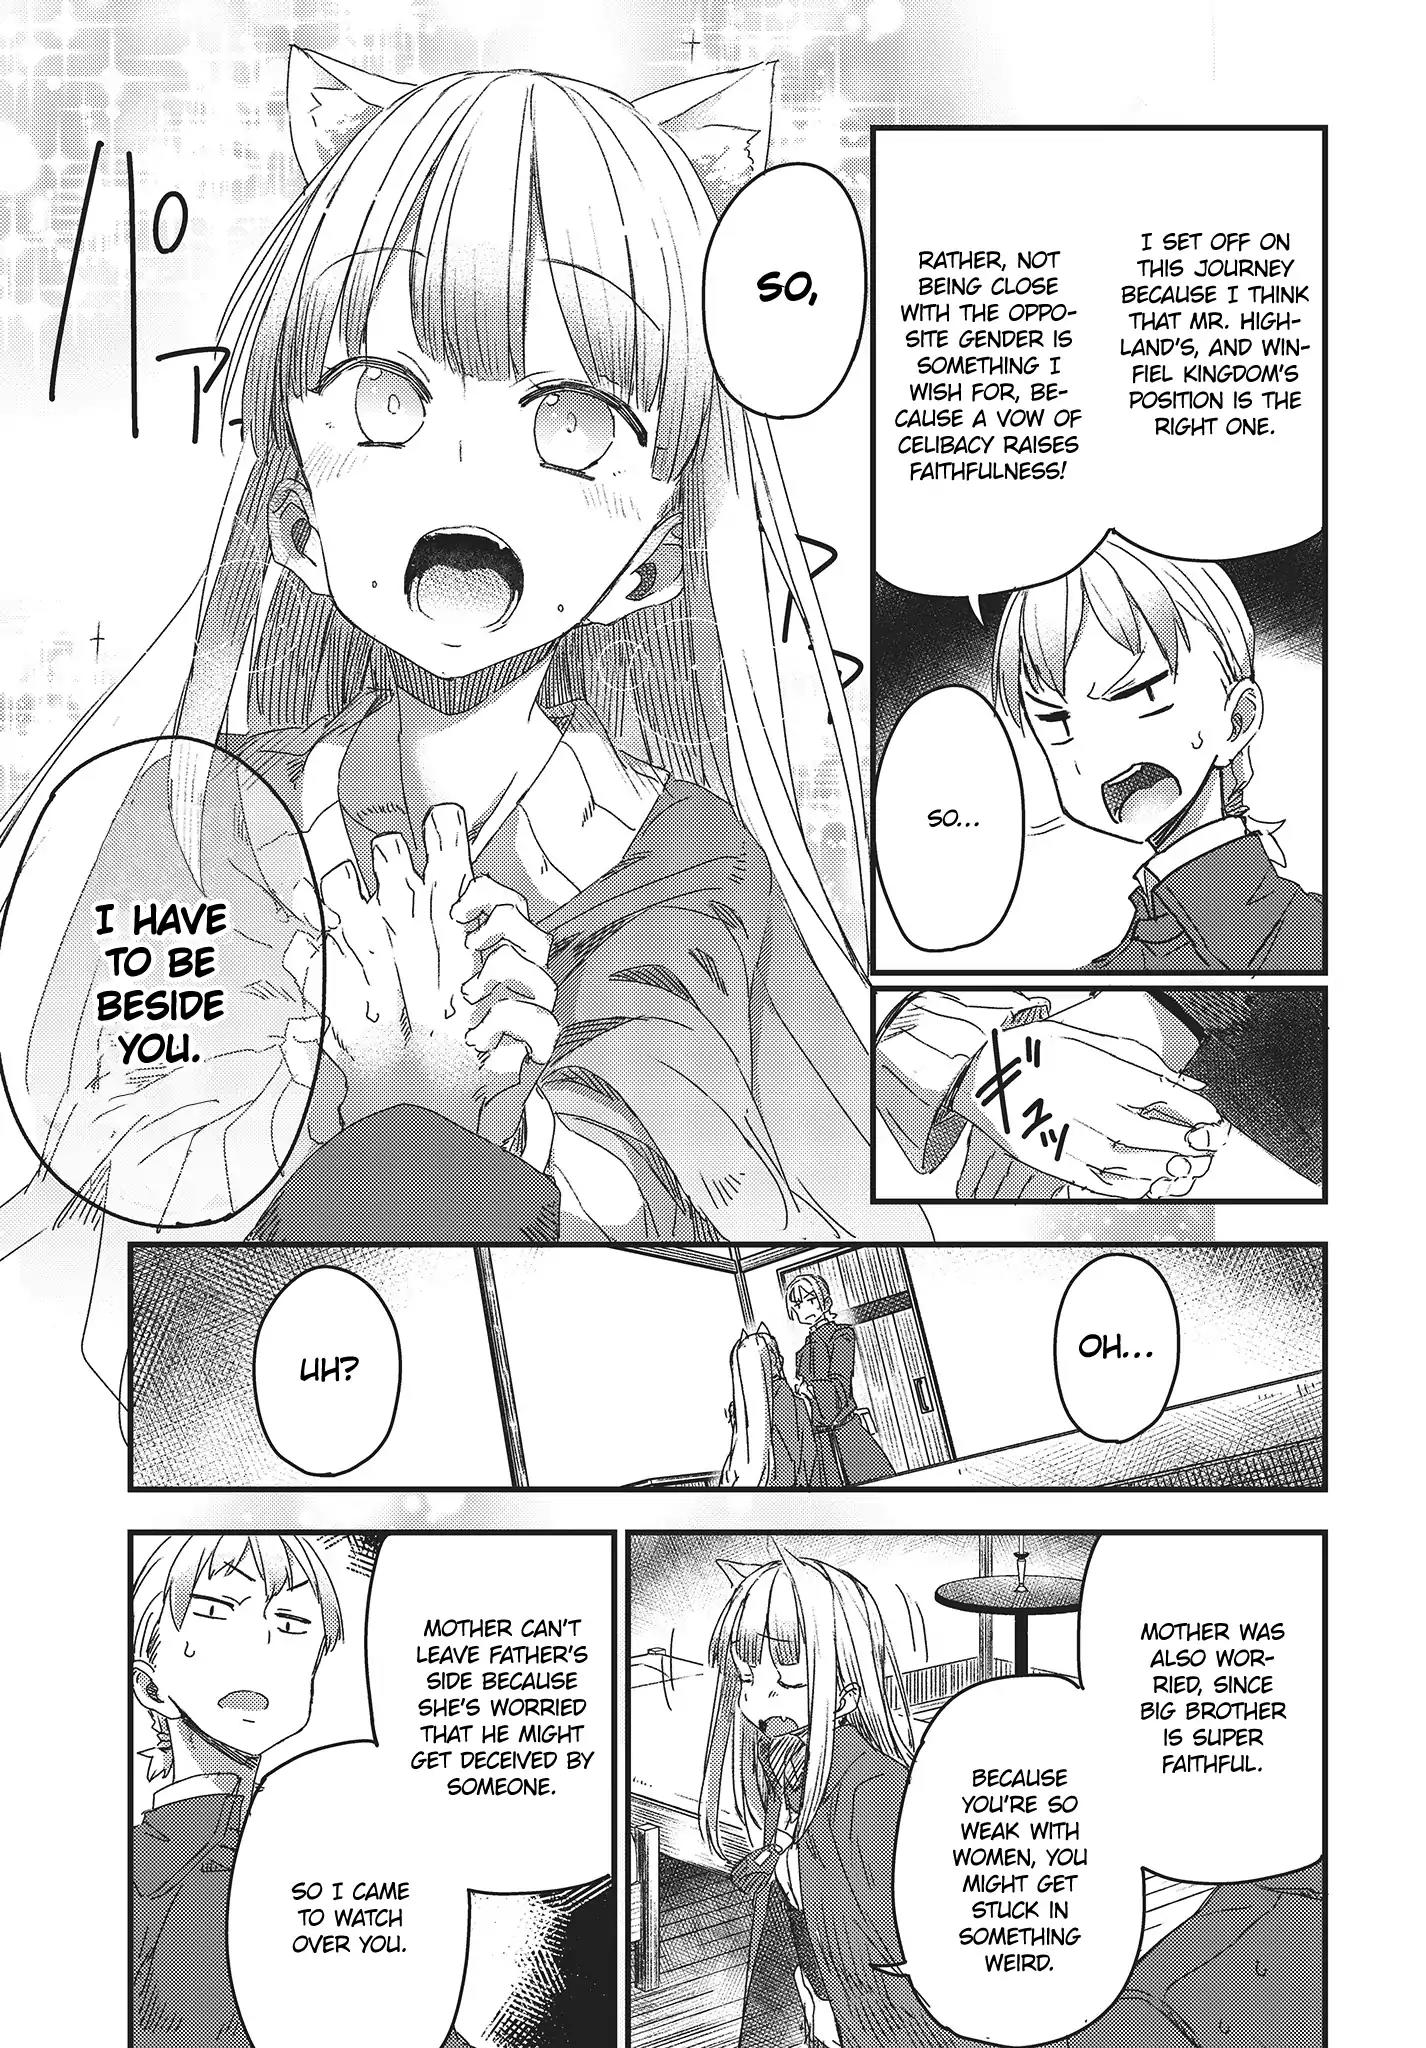 Wolf & Parchment: New Theory Spice & Wolf Vol.1 Chapter 2